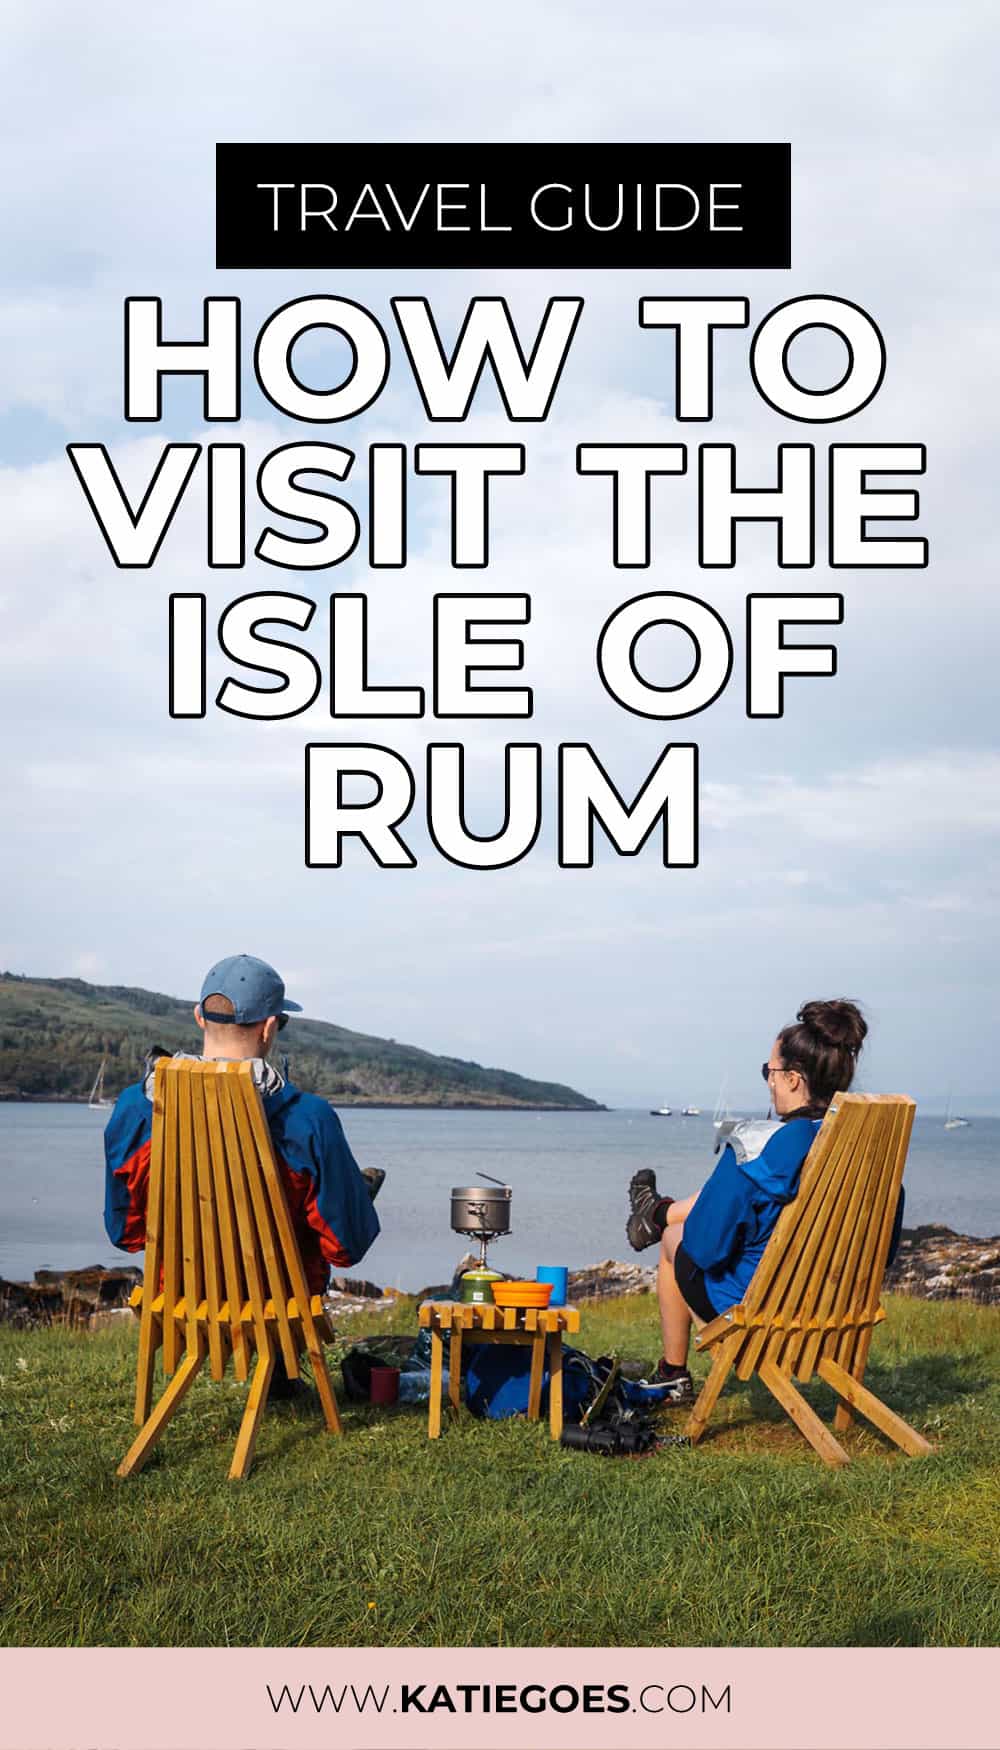 Travel Guide: How to Visit the Isle of Rum